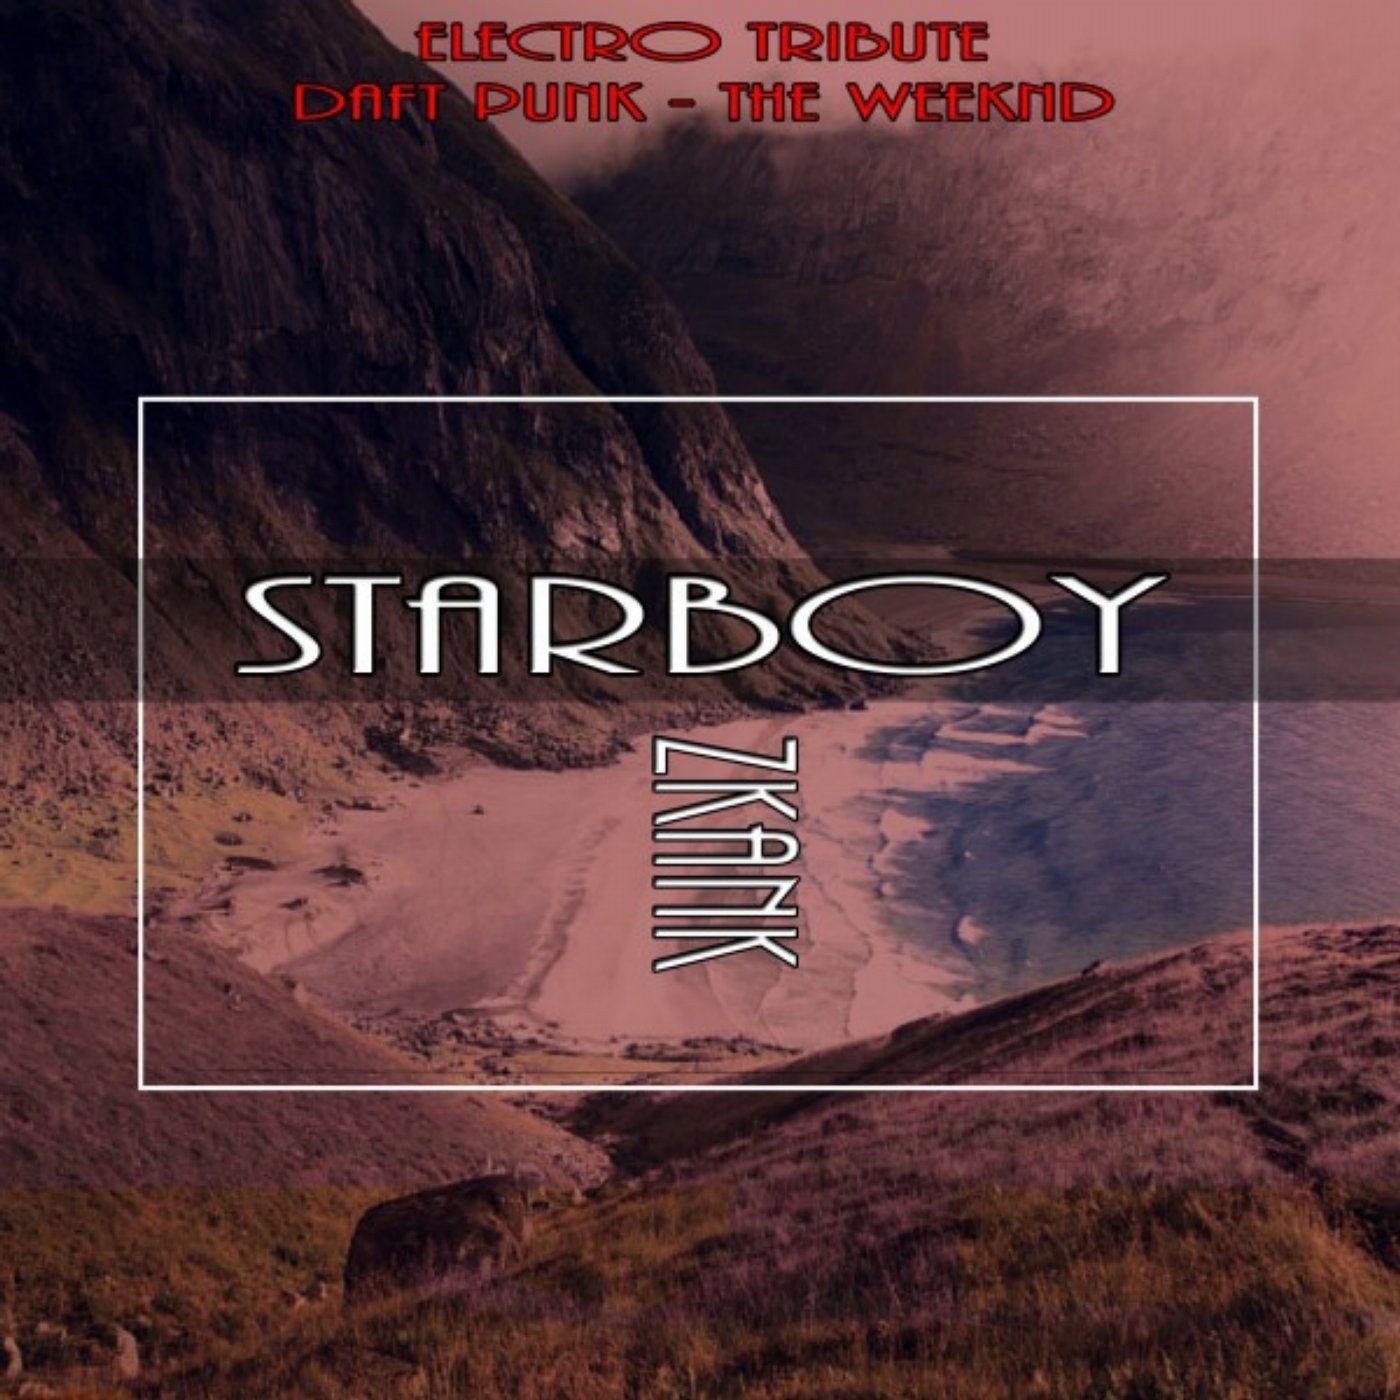 Starboy (Electro Tribute Daft Punk - The Weeknd)